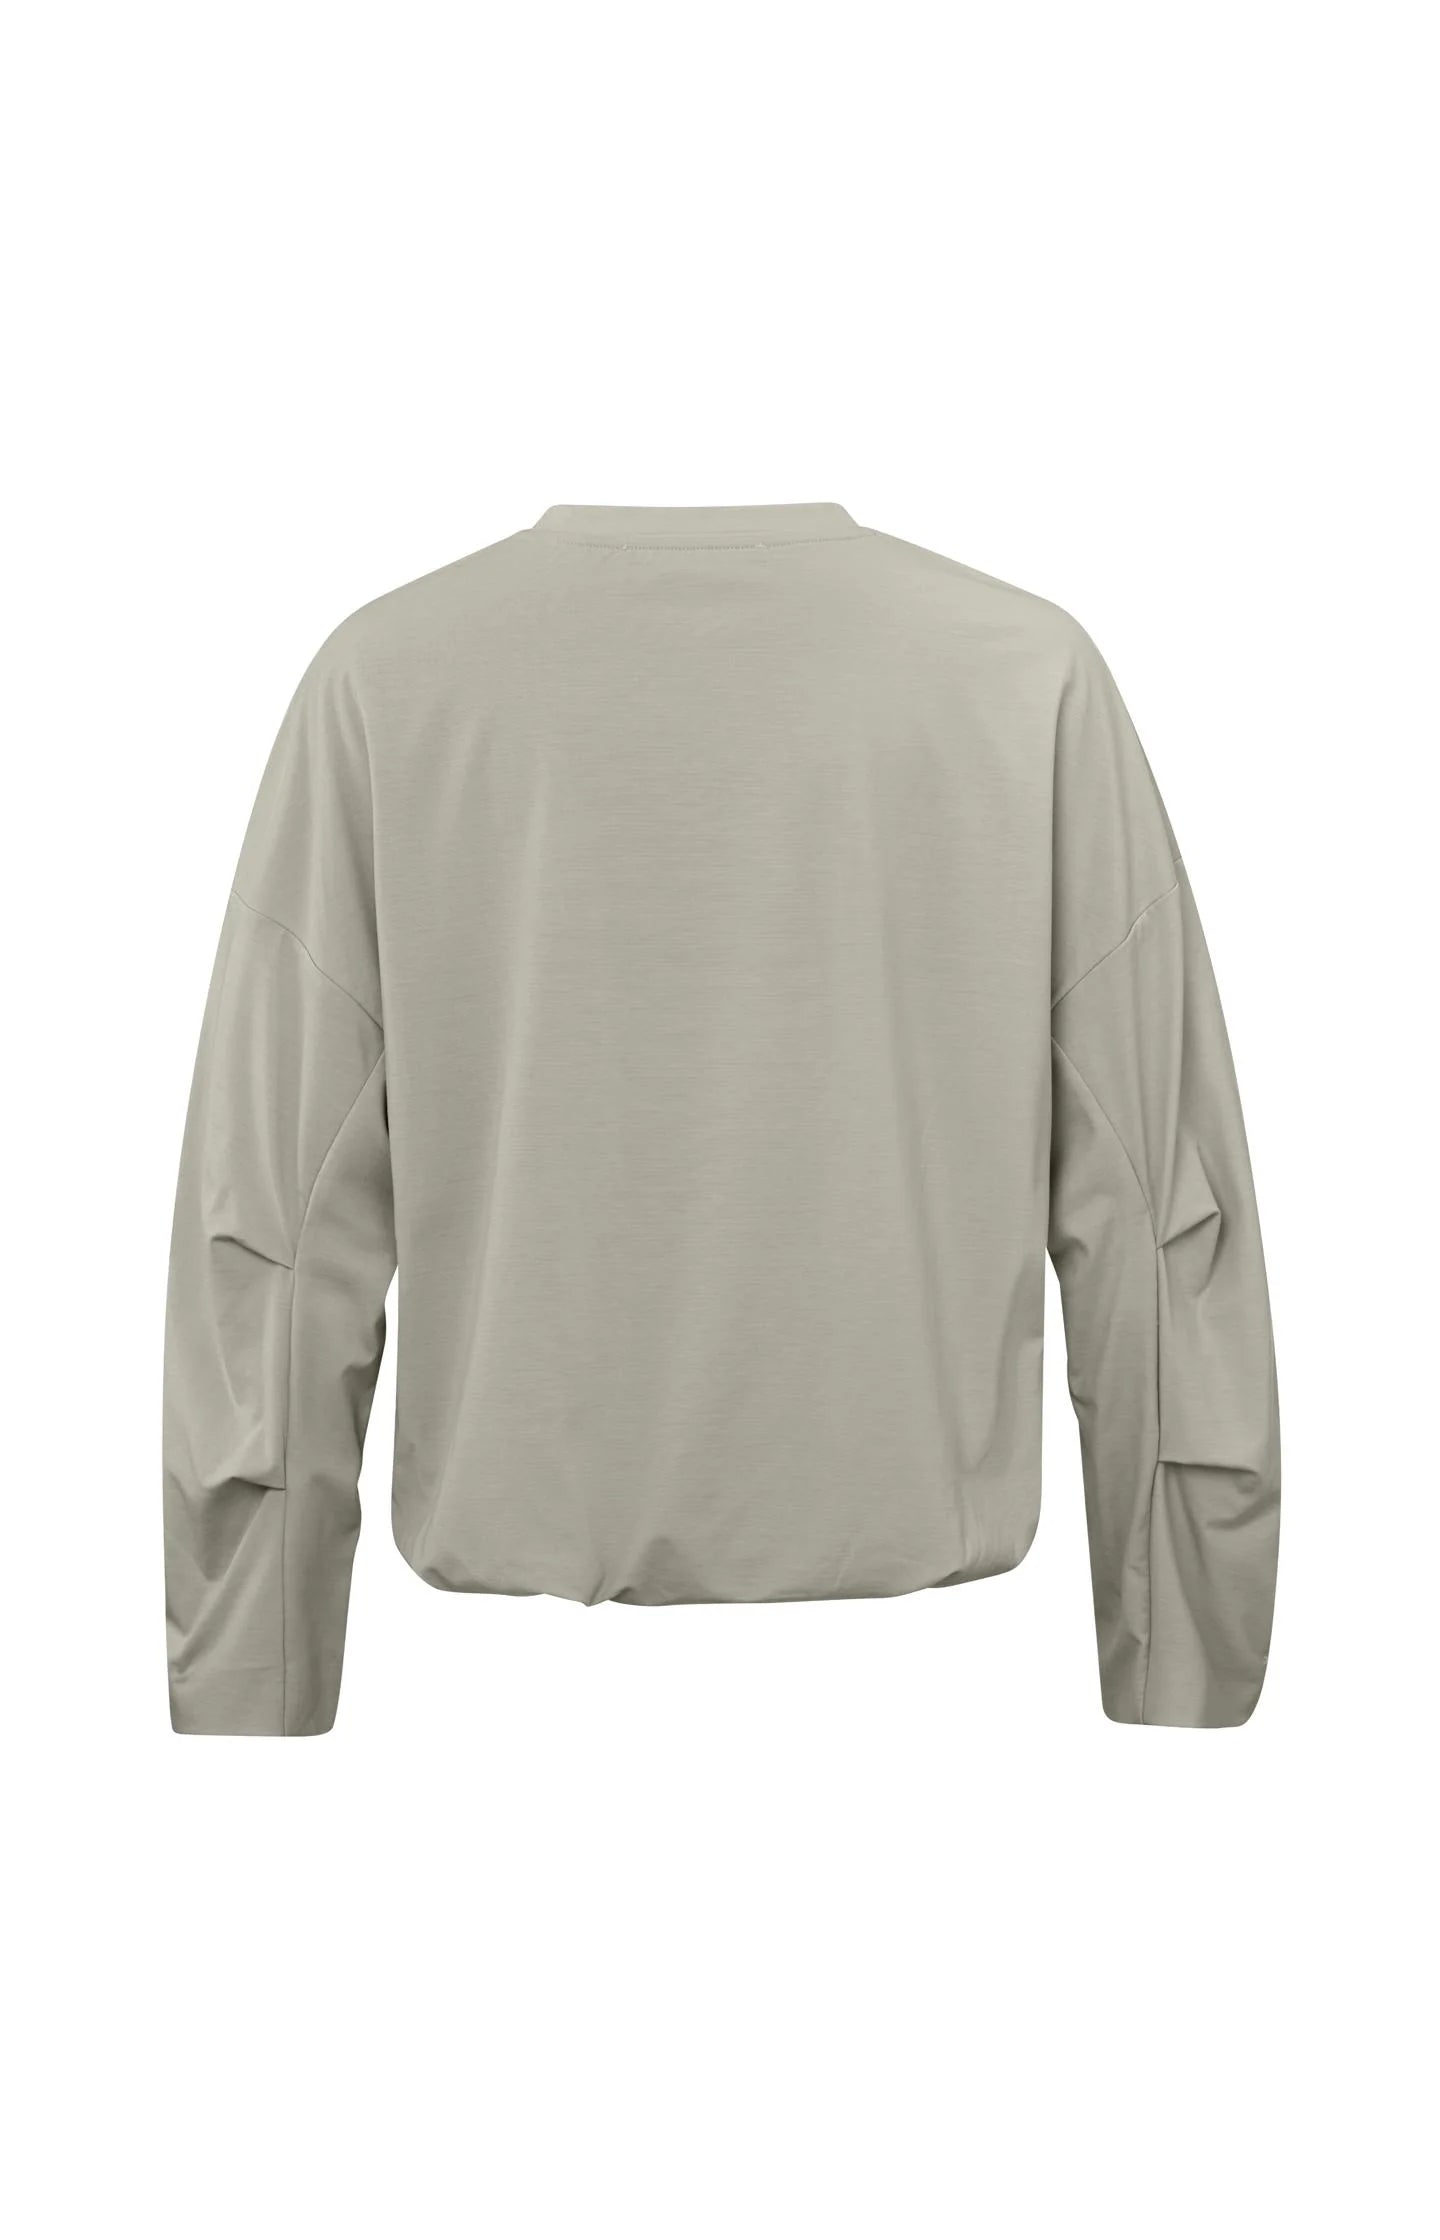 Pleated Crewneck in Agate Grey